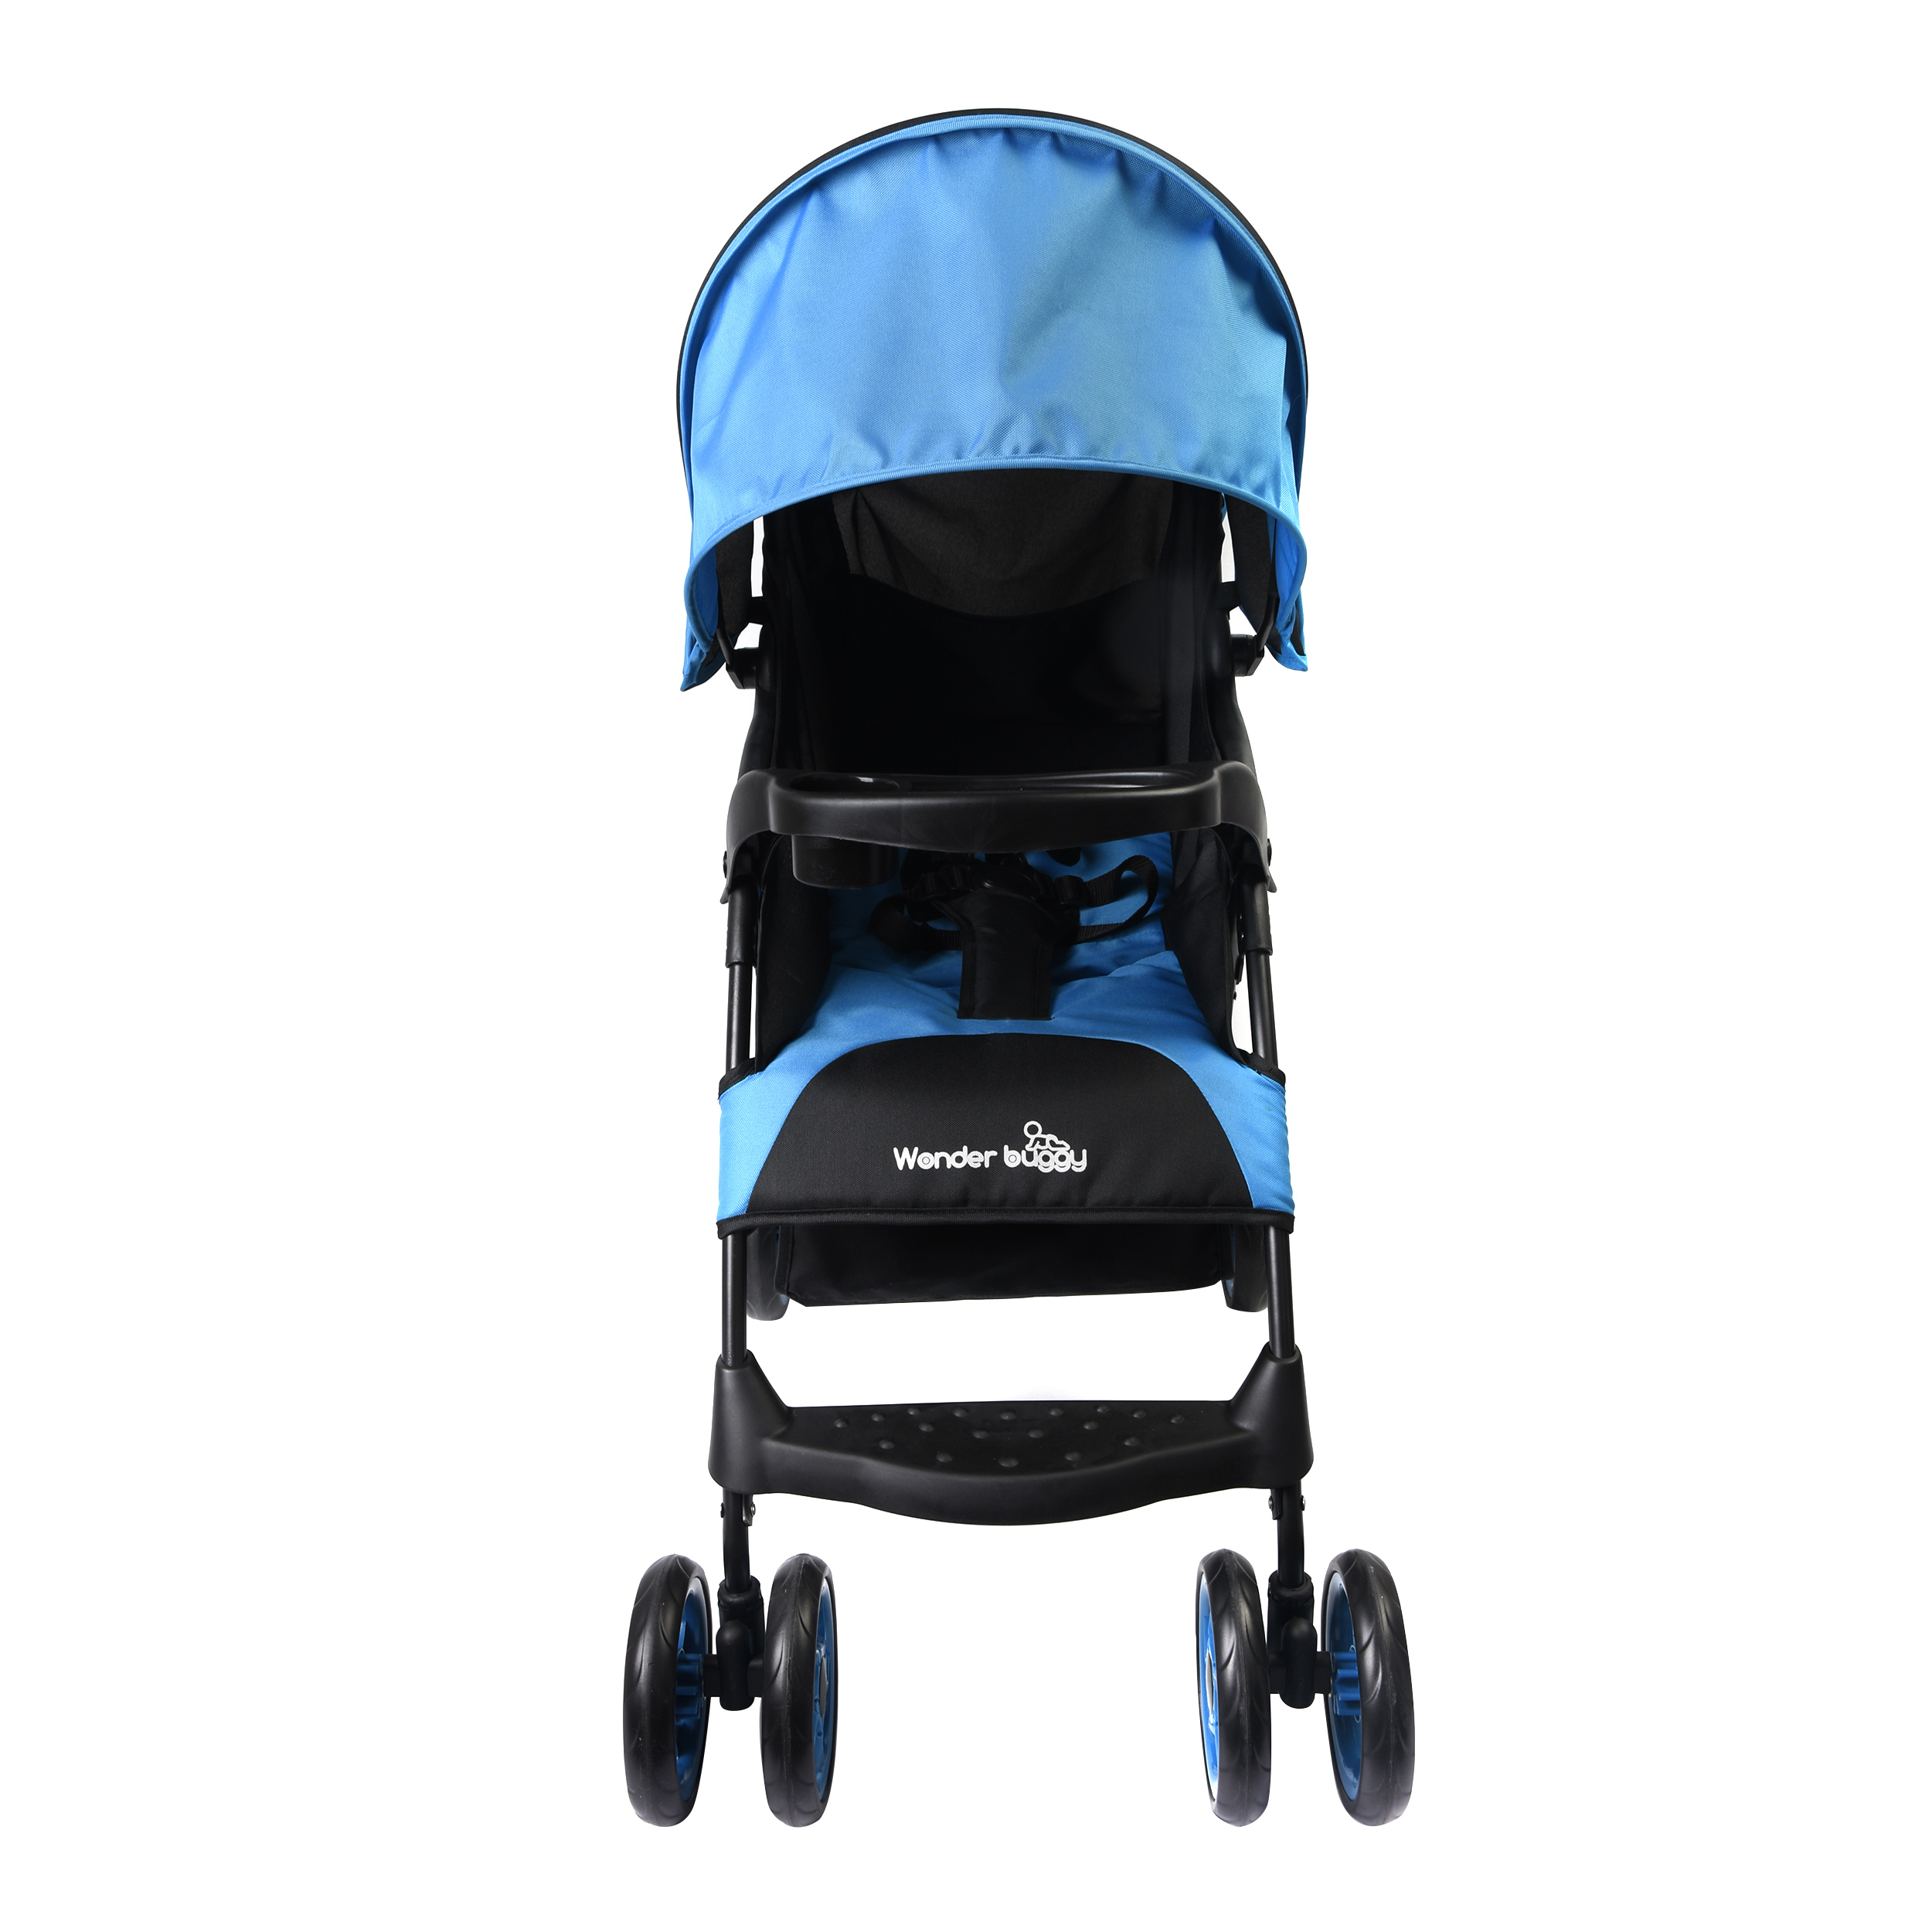 Wonder buggy Mimmo Deluxe Lightweight Stroller, Teal Blue - image 3 of 6